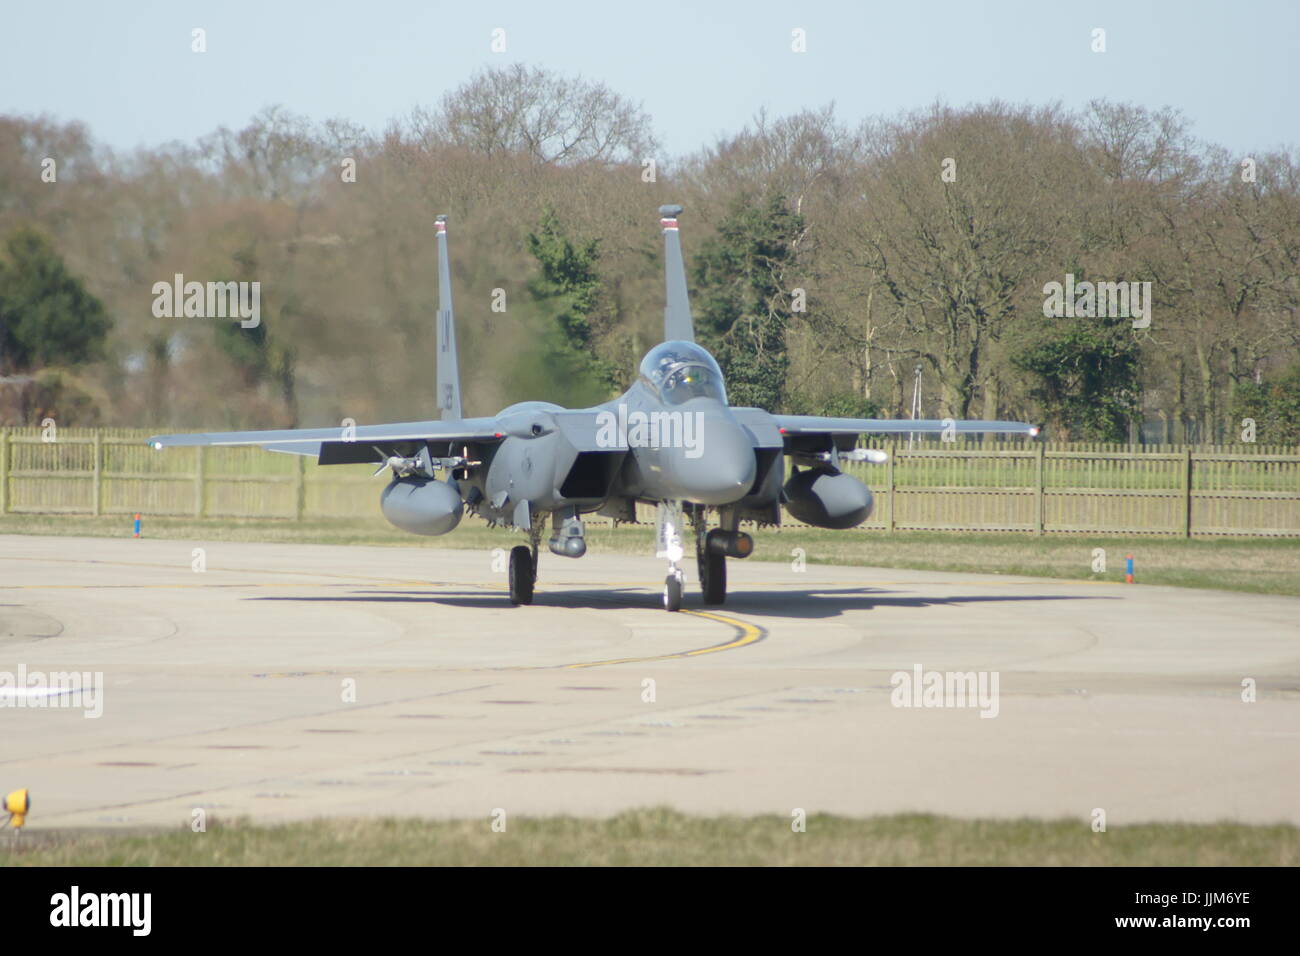 F-15 military American twin-engine, all-weather tactical fighter, Syrian conflict Stock Photo